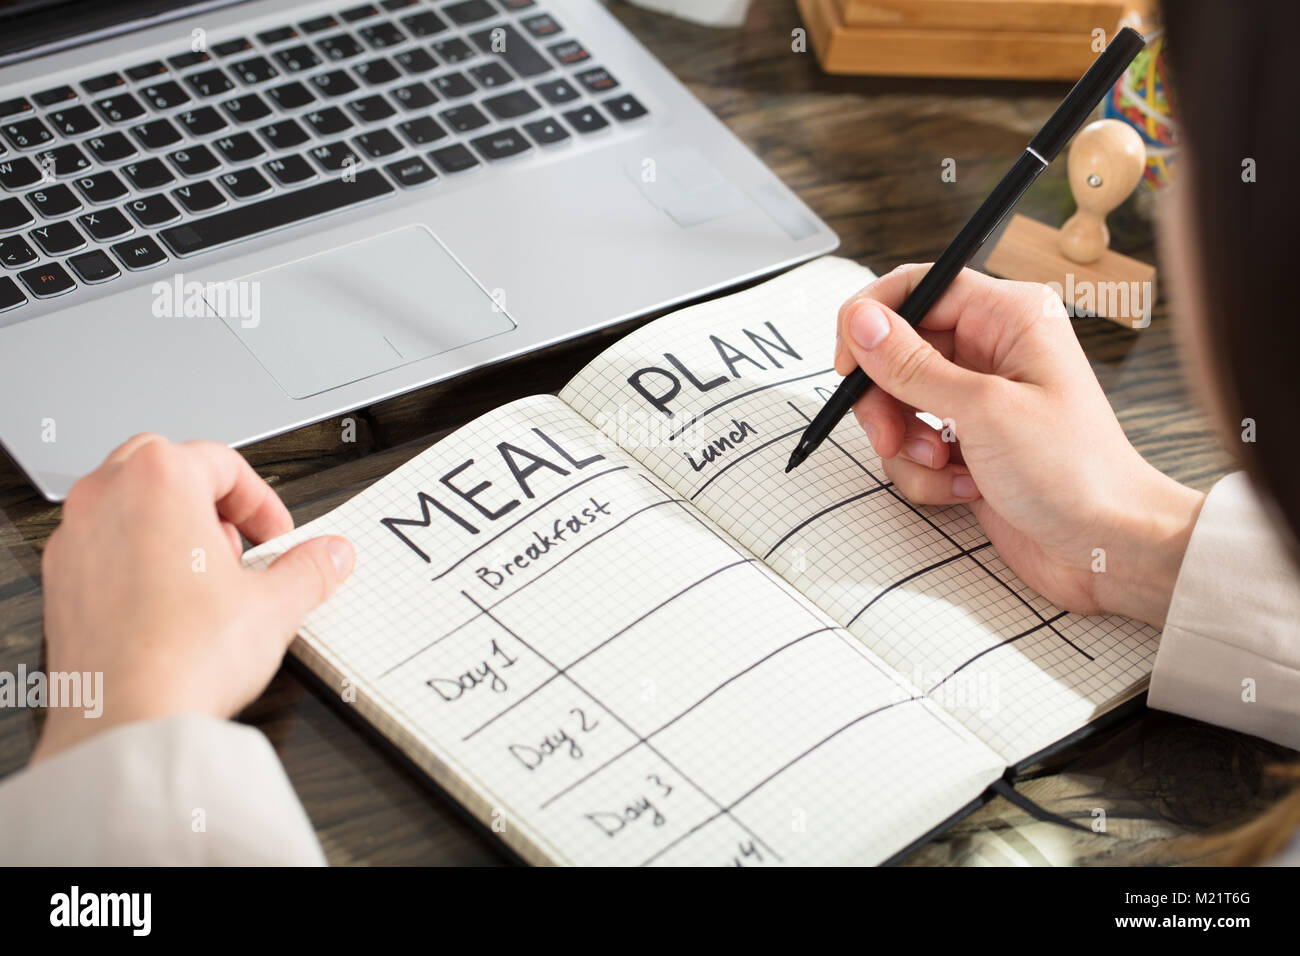 Businesswoman Writing Down A Meal Plan In Checkered Notebook With Black Marker Over The Desk Stock Photo